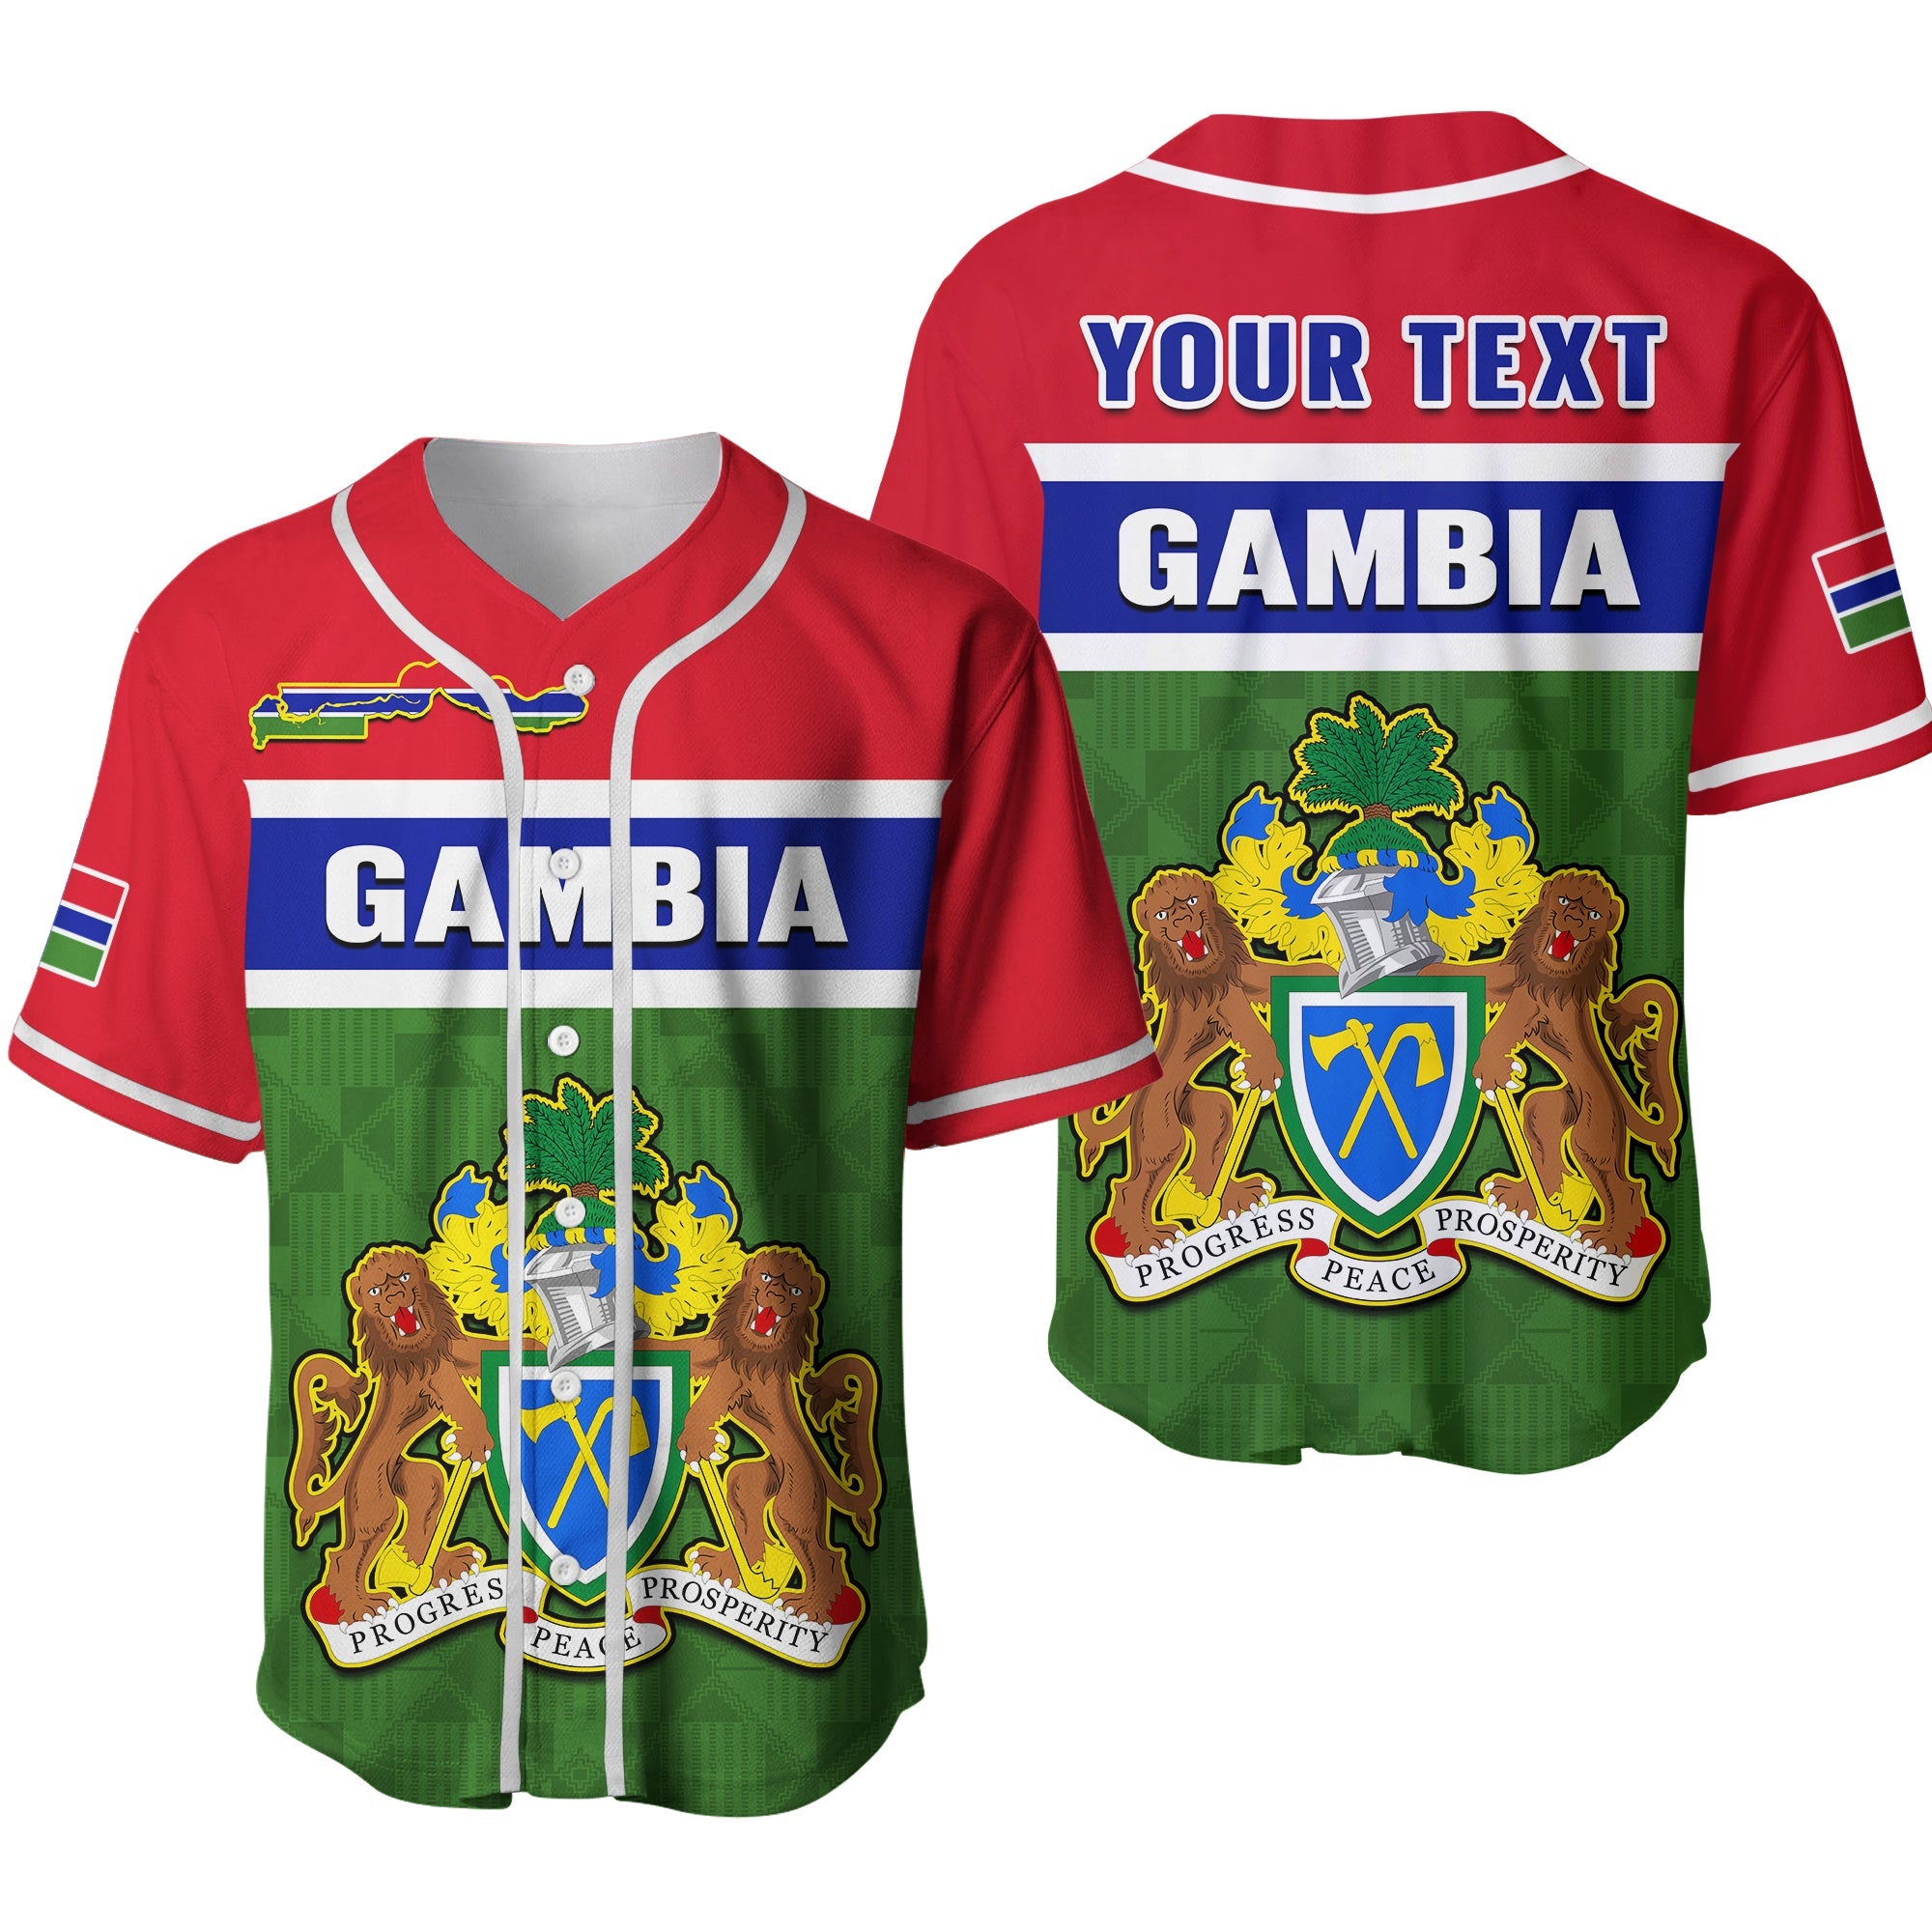 custom-personalised-gambia-baseball-jersey-happy-58th-independence-anniversary-flag-style-ver02